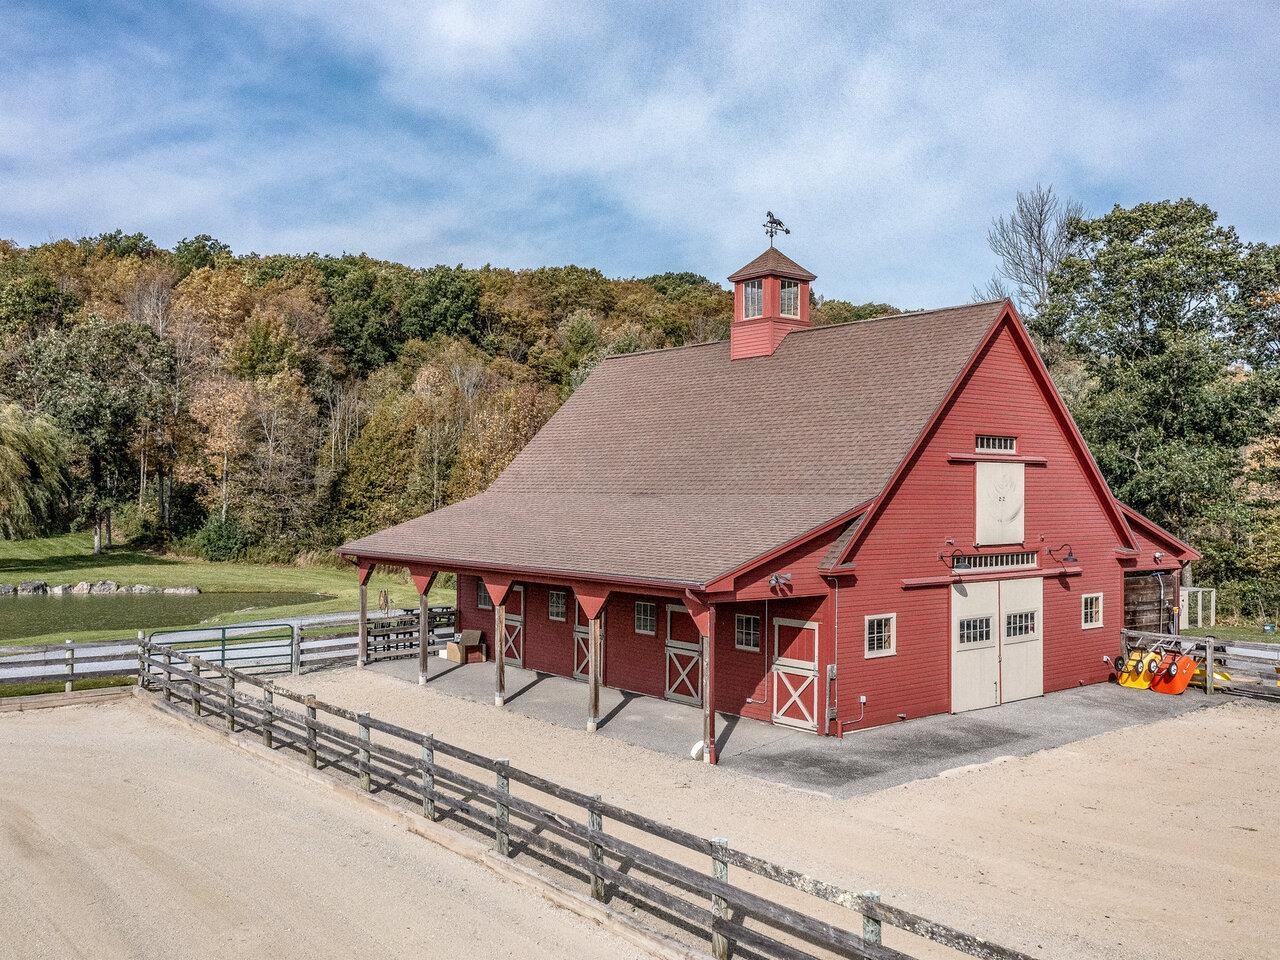 Barn with turnout, riding ring